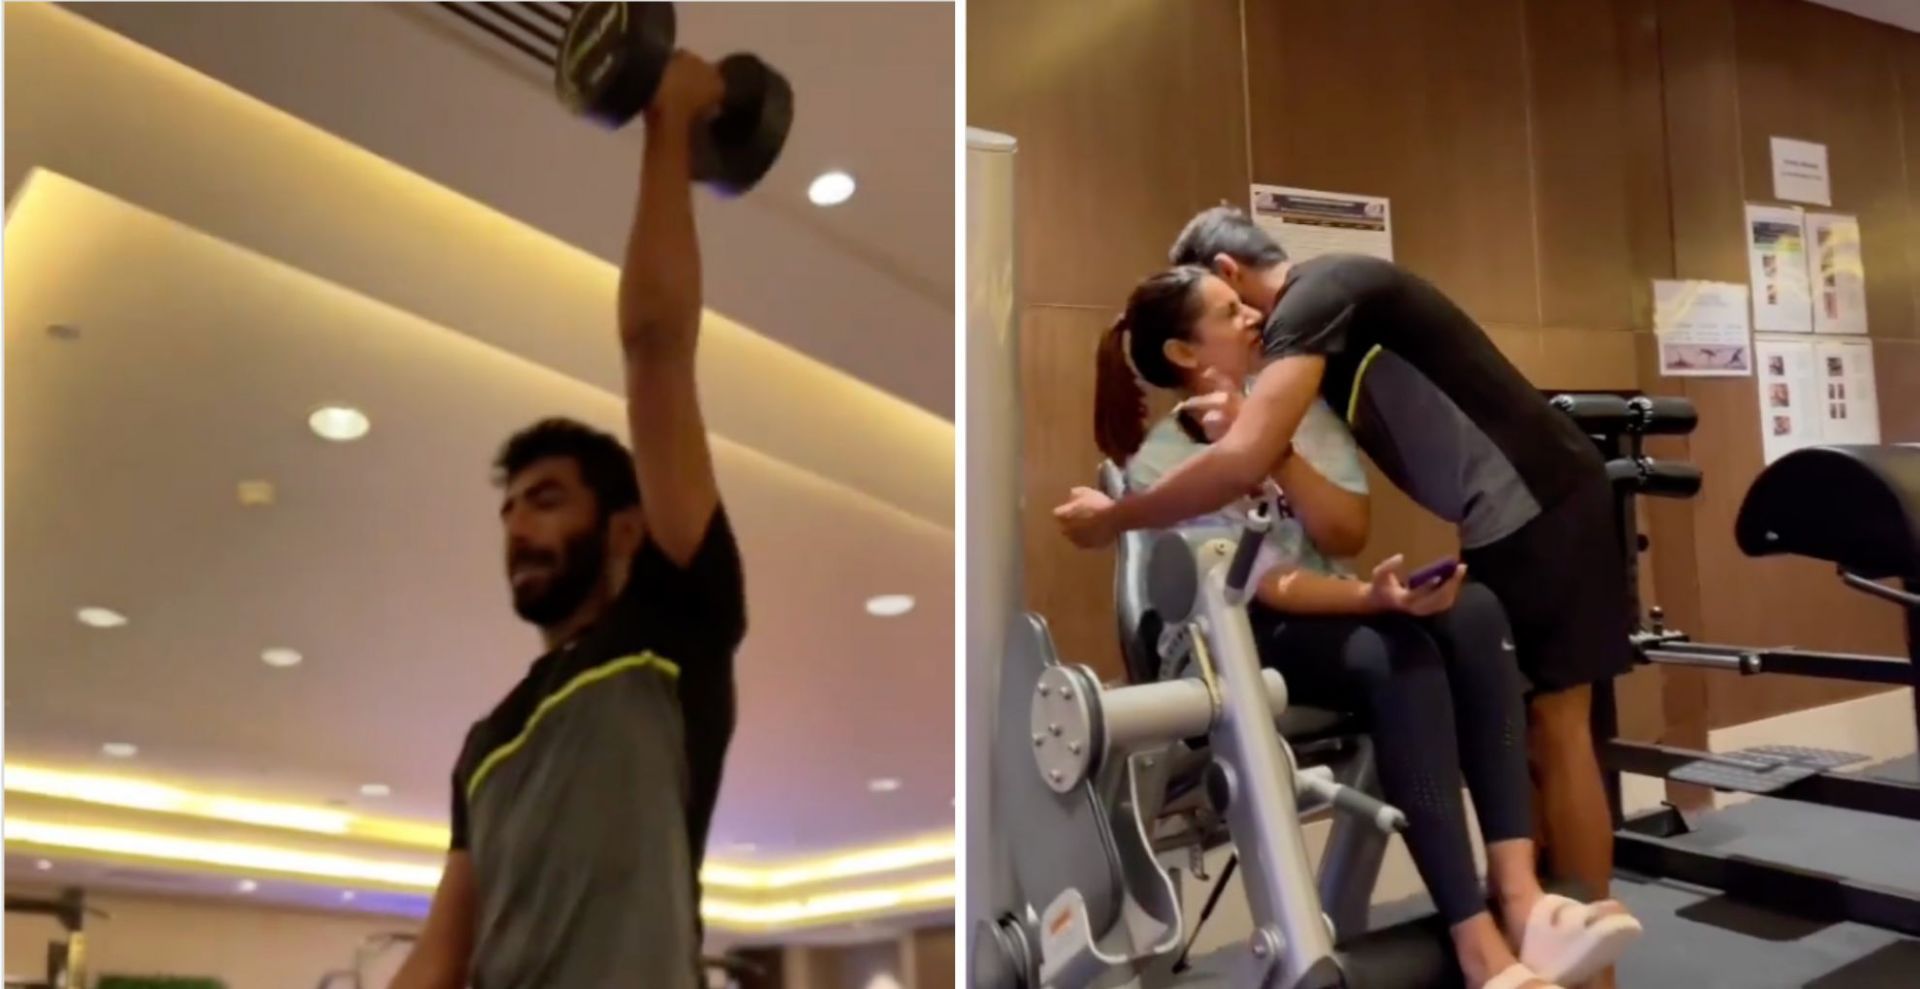 Bumrah shares a glimpse of his gym session (Credits: Jasprit Bumrah Instagram)